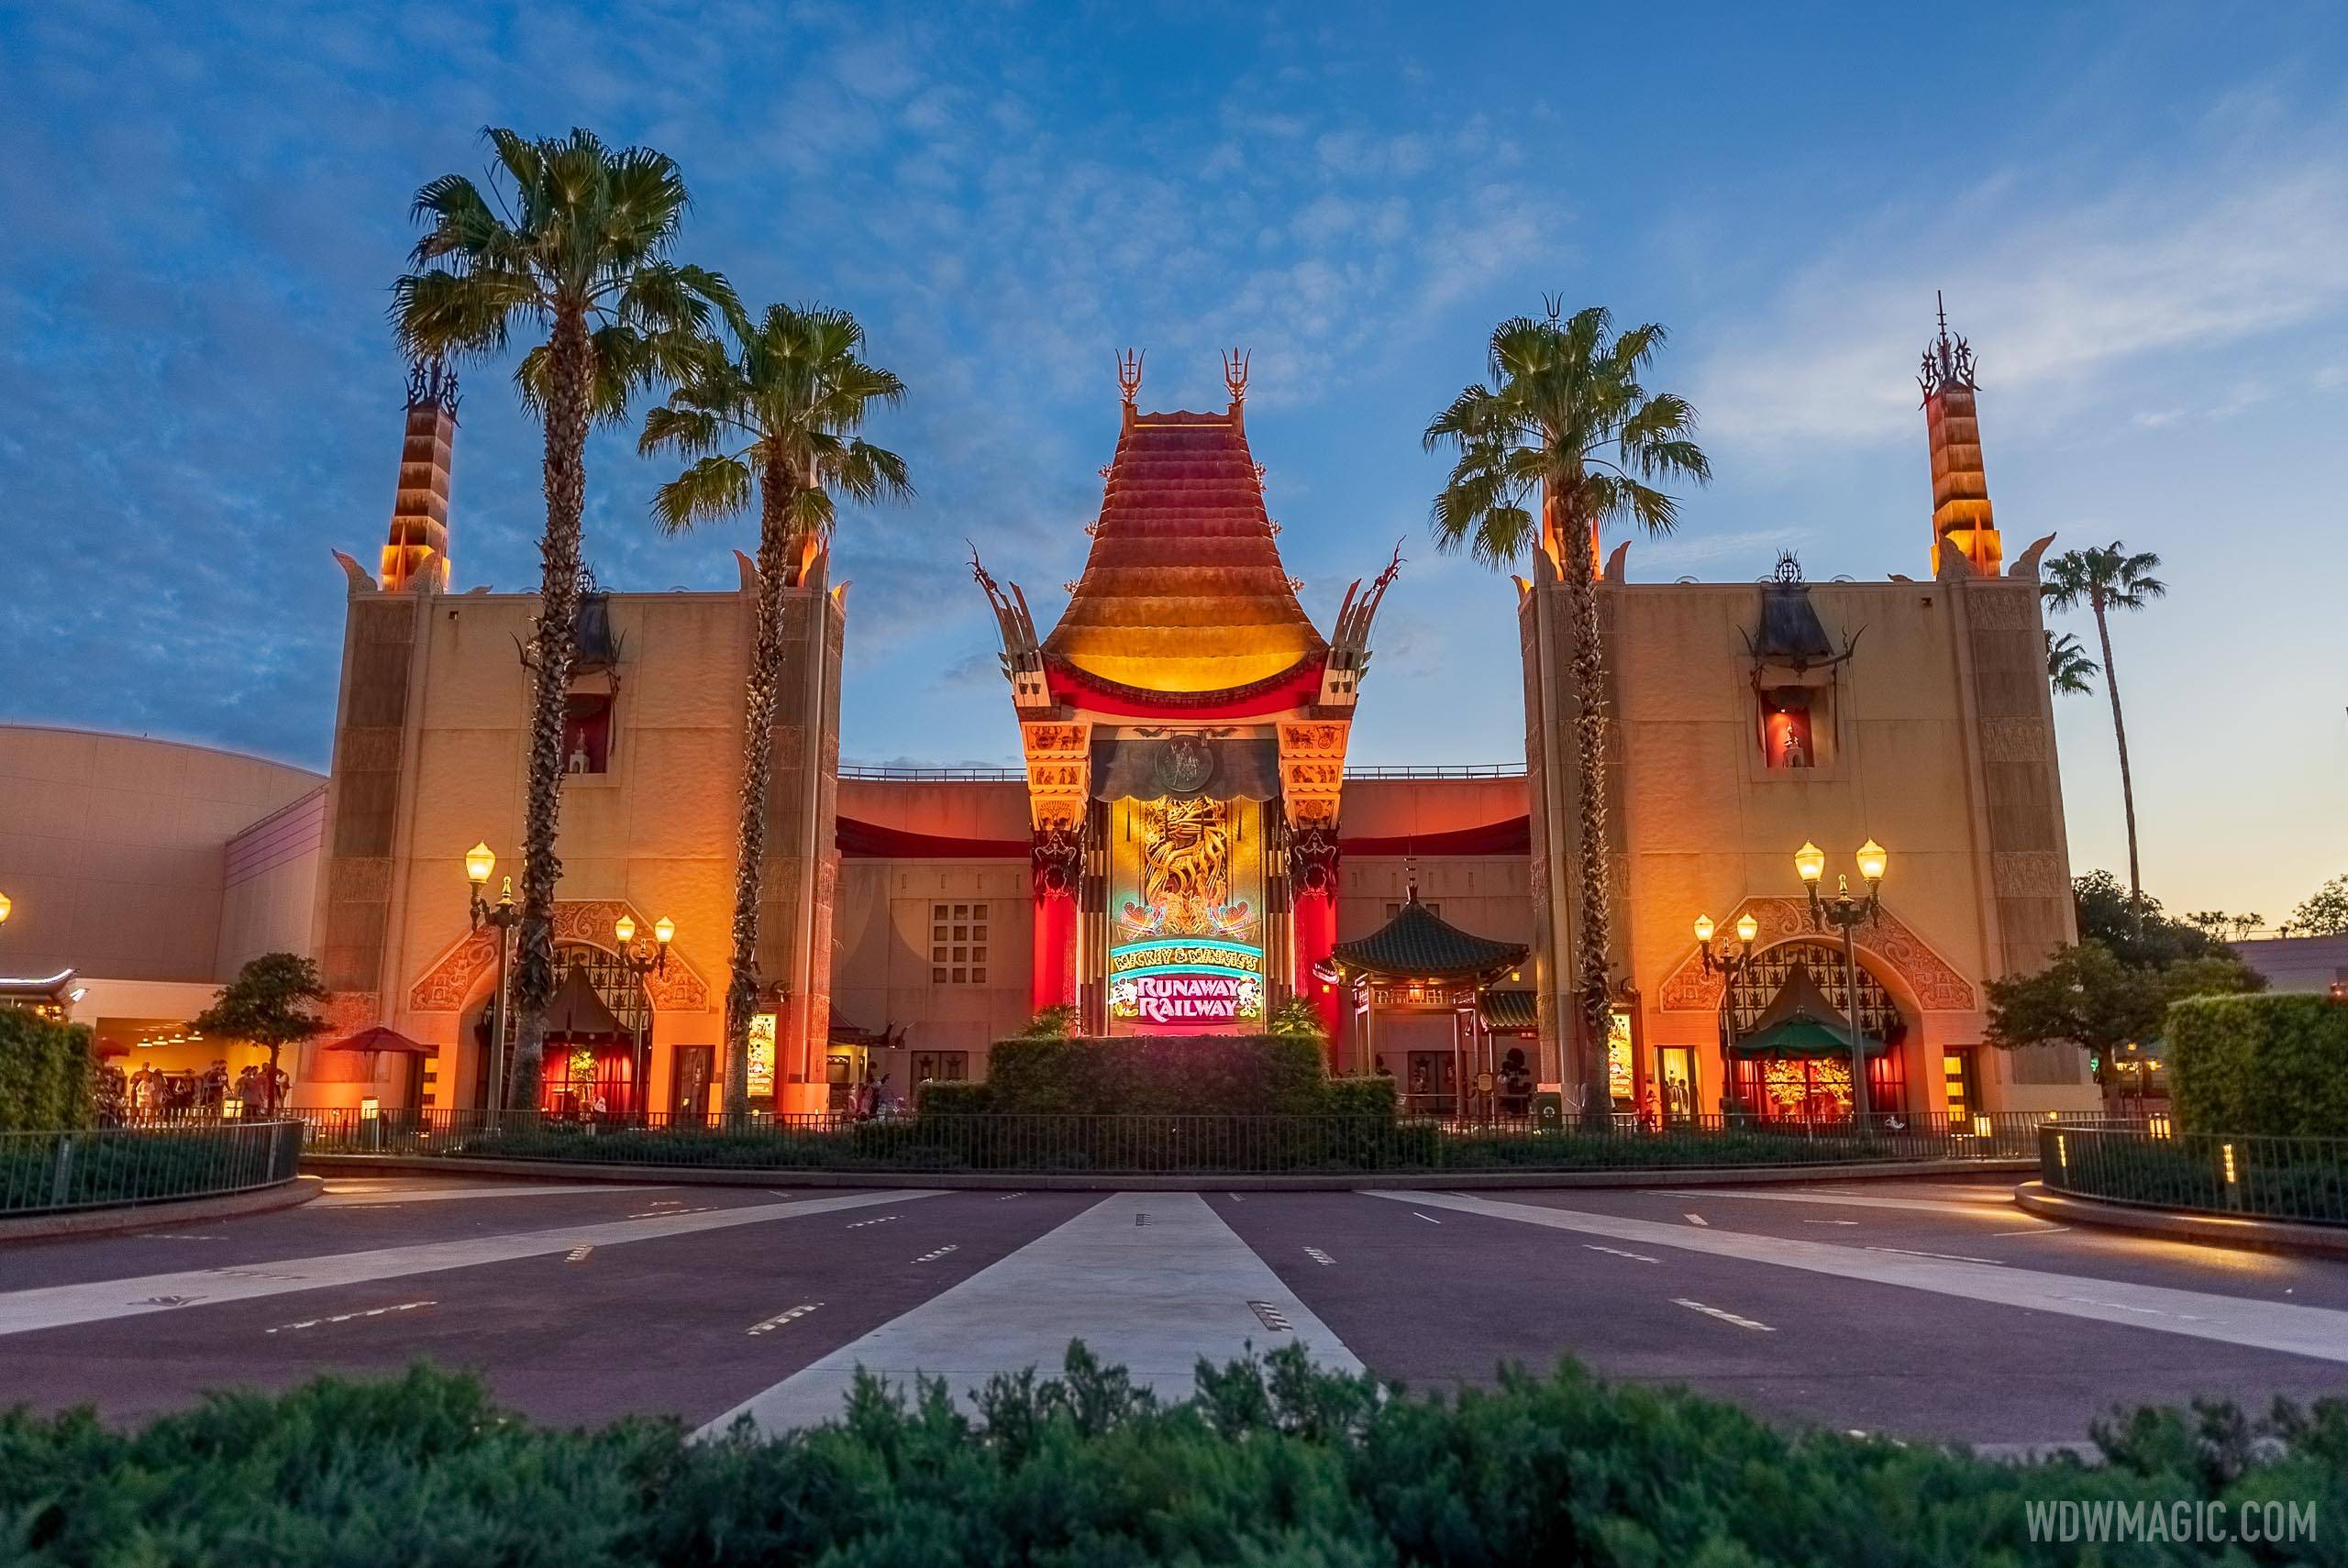 Star Wars May 4th reservations at Disney's Hollywood Studios reopen for Disney World Annual Passholders